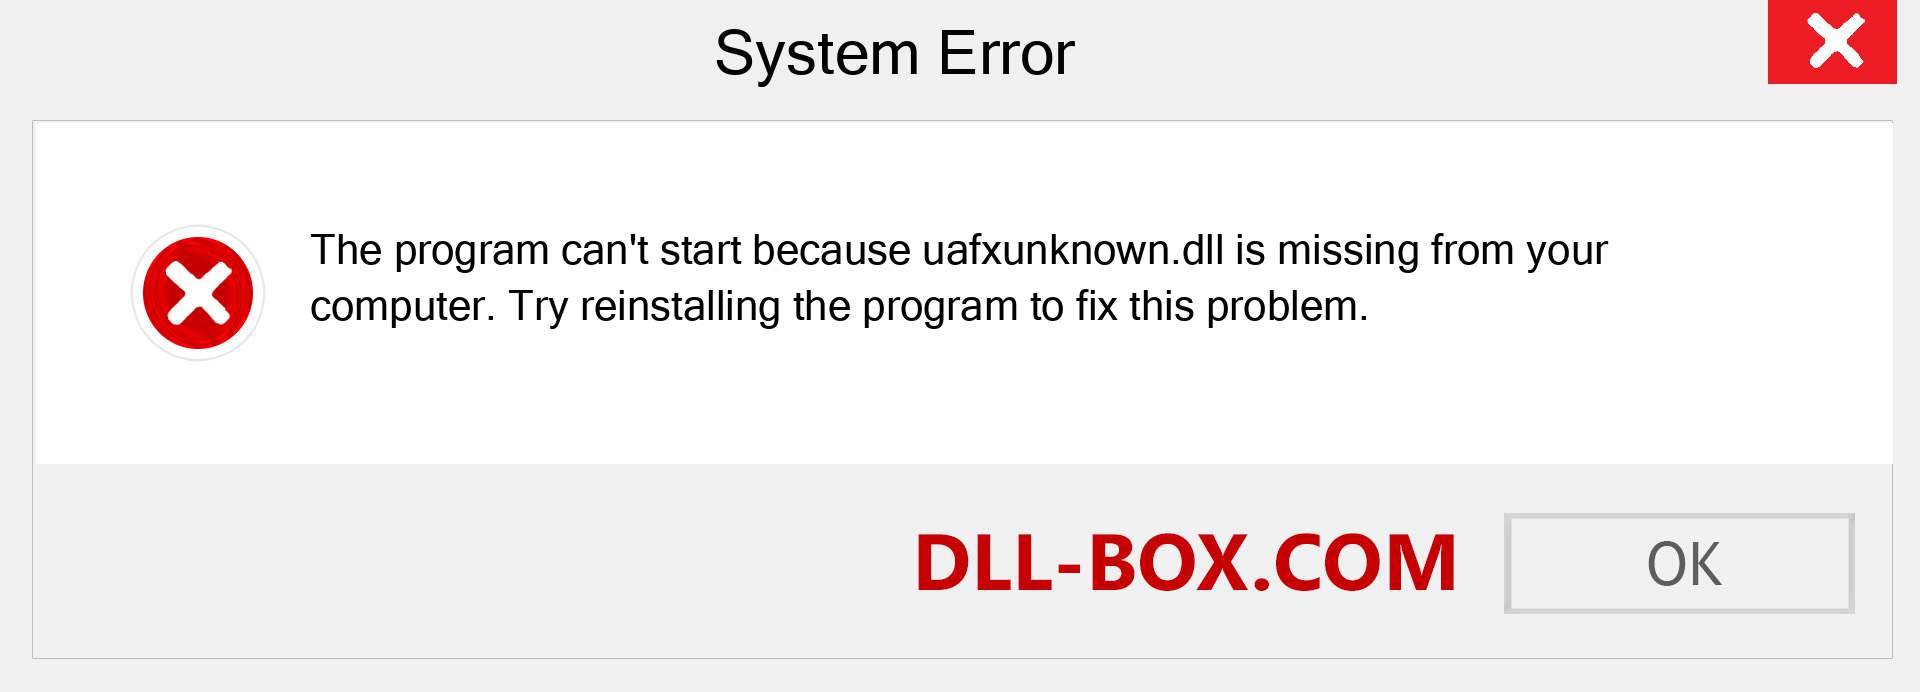  uafxunknown.dll file is missing?. Download for Windows 7, 8, 10 - Fix  uafxunknown dll Missing Error on Windows, photos, images